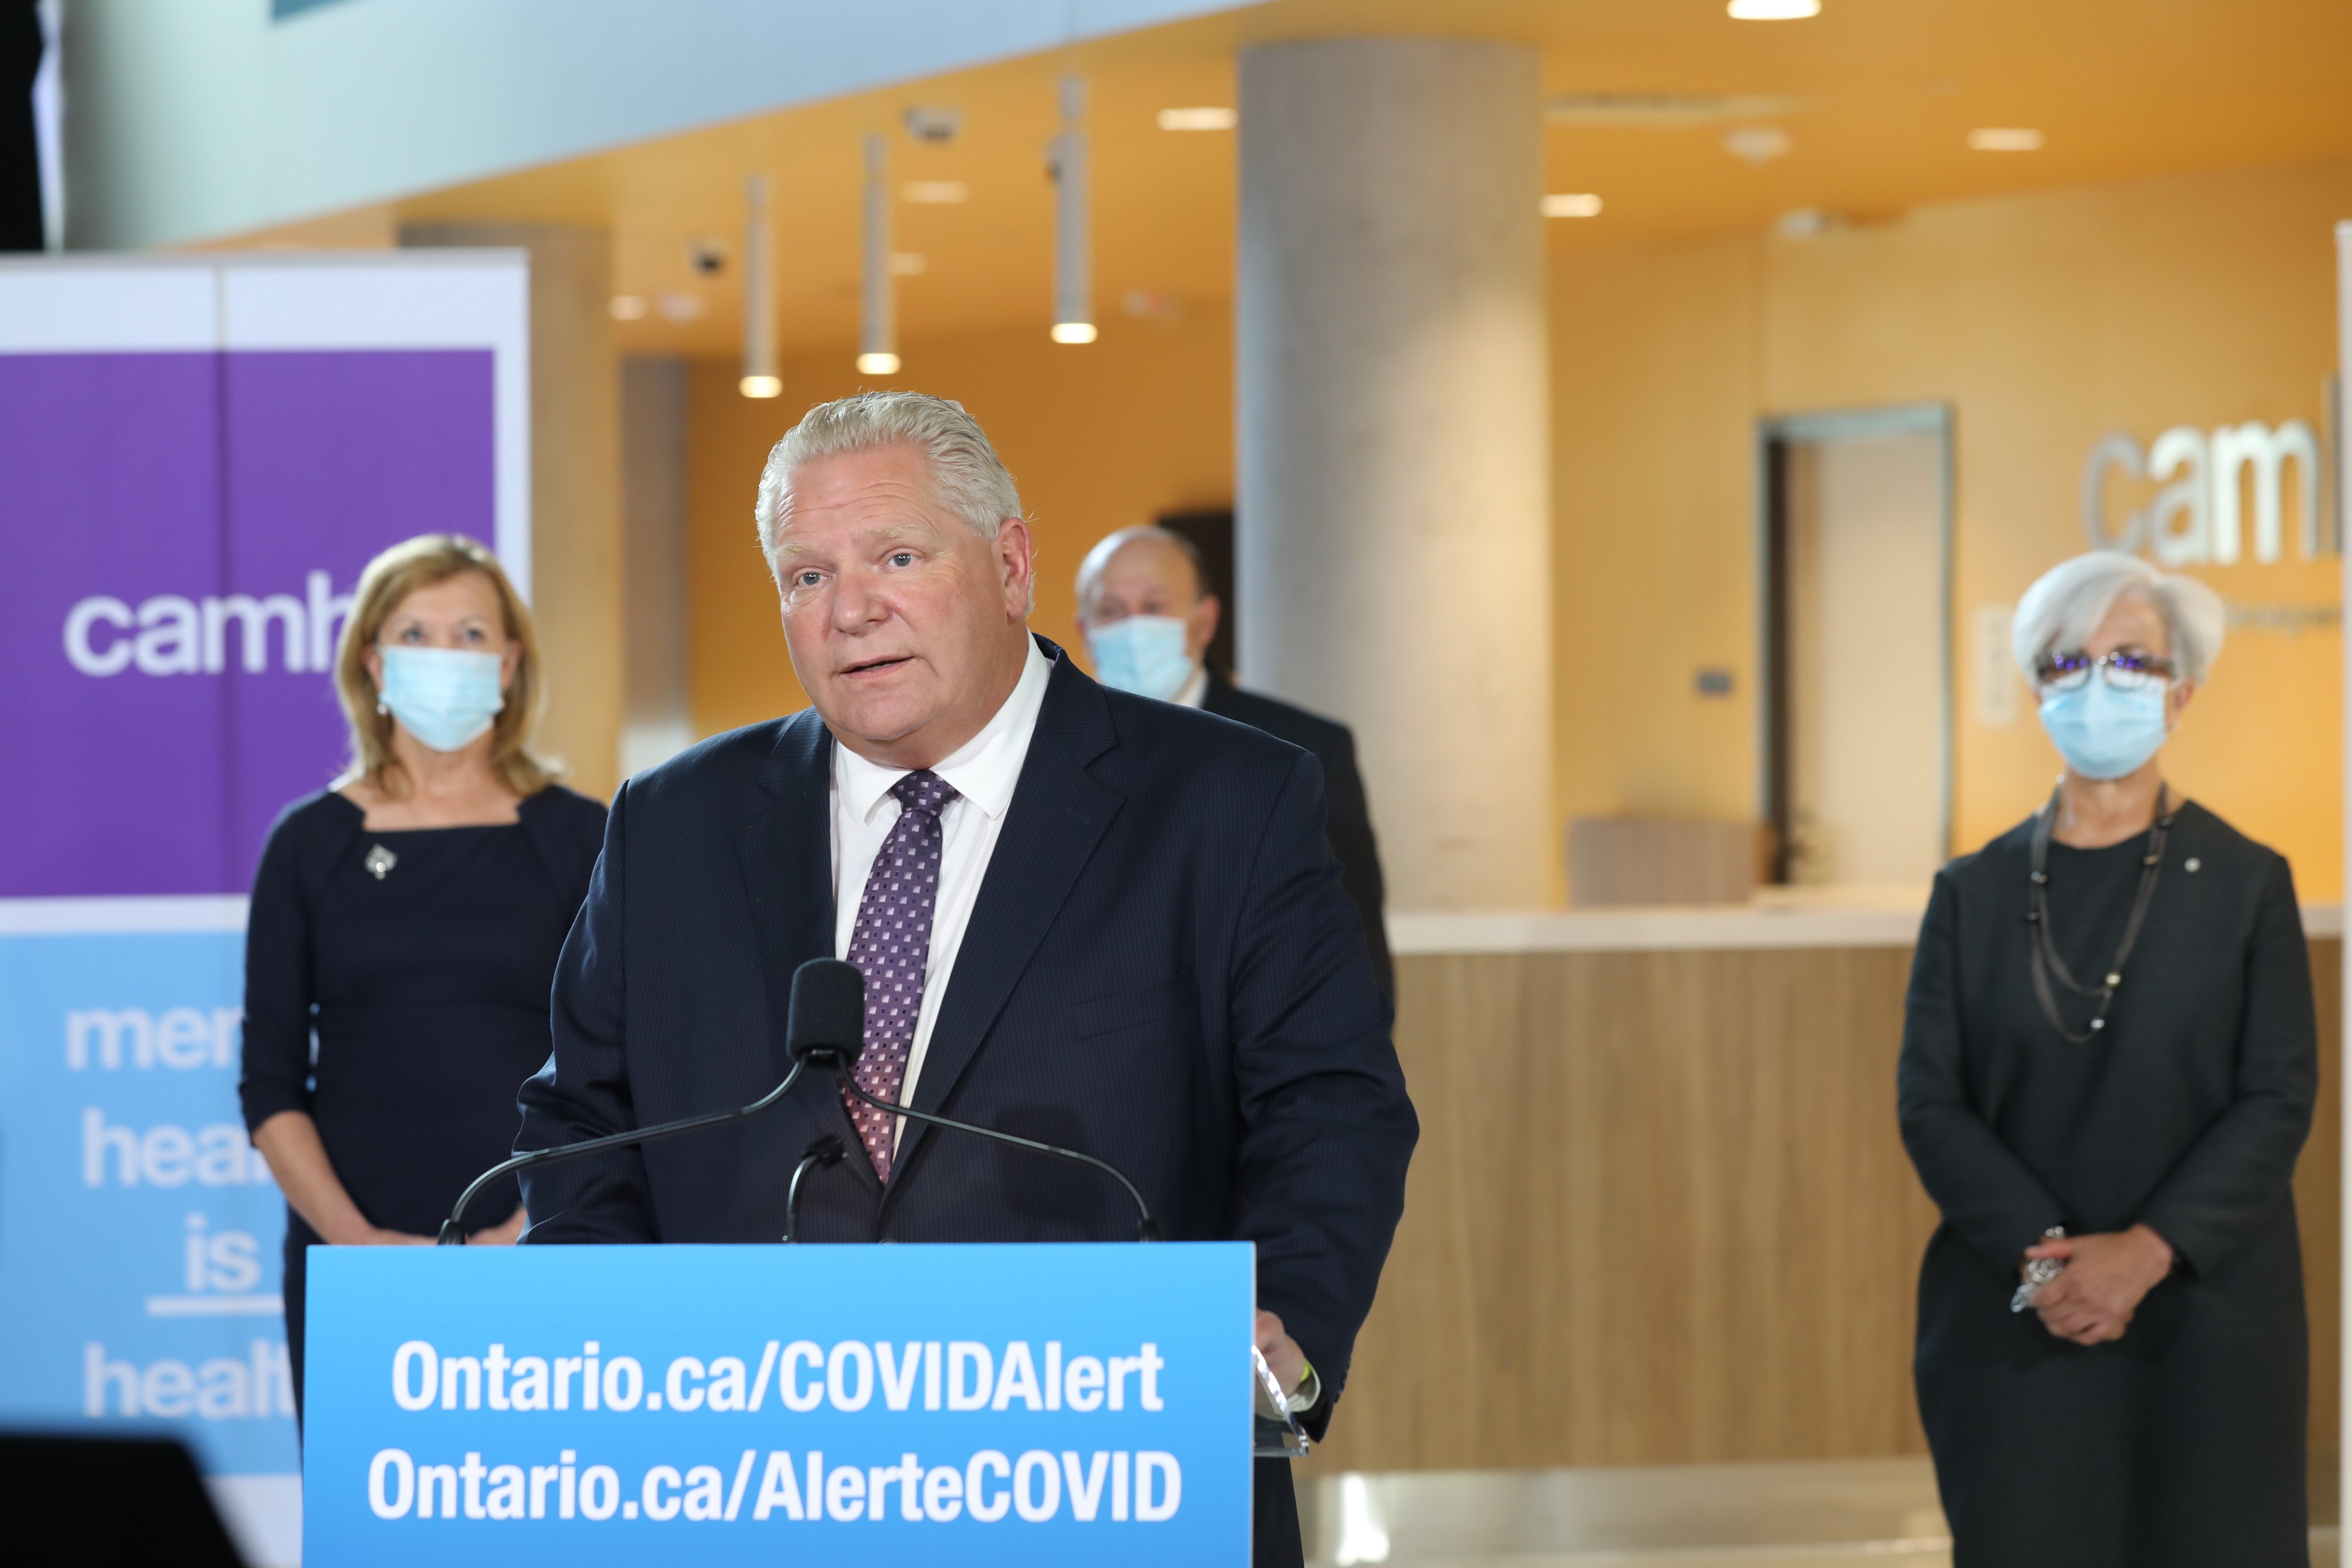 Doug Ford makes announcement at CAMH on October 7, 2020